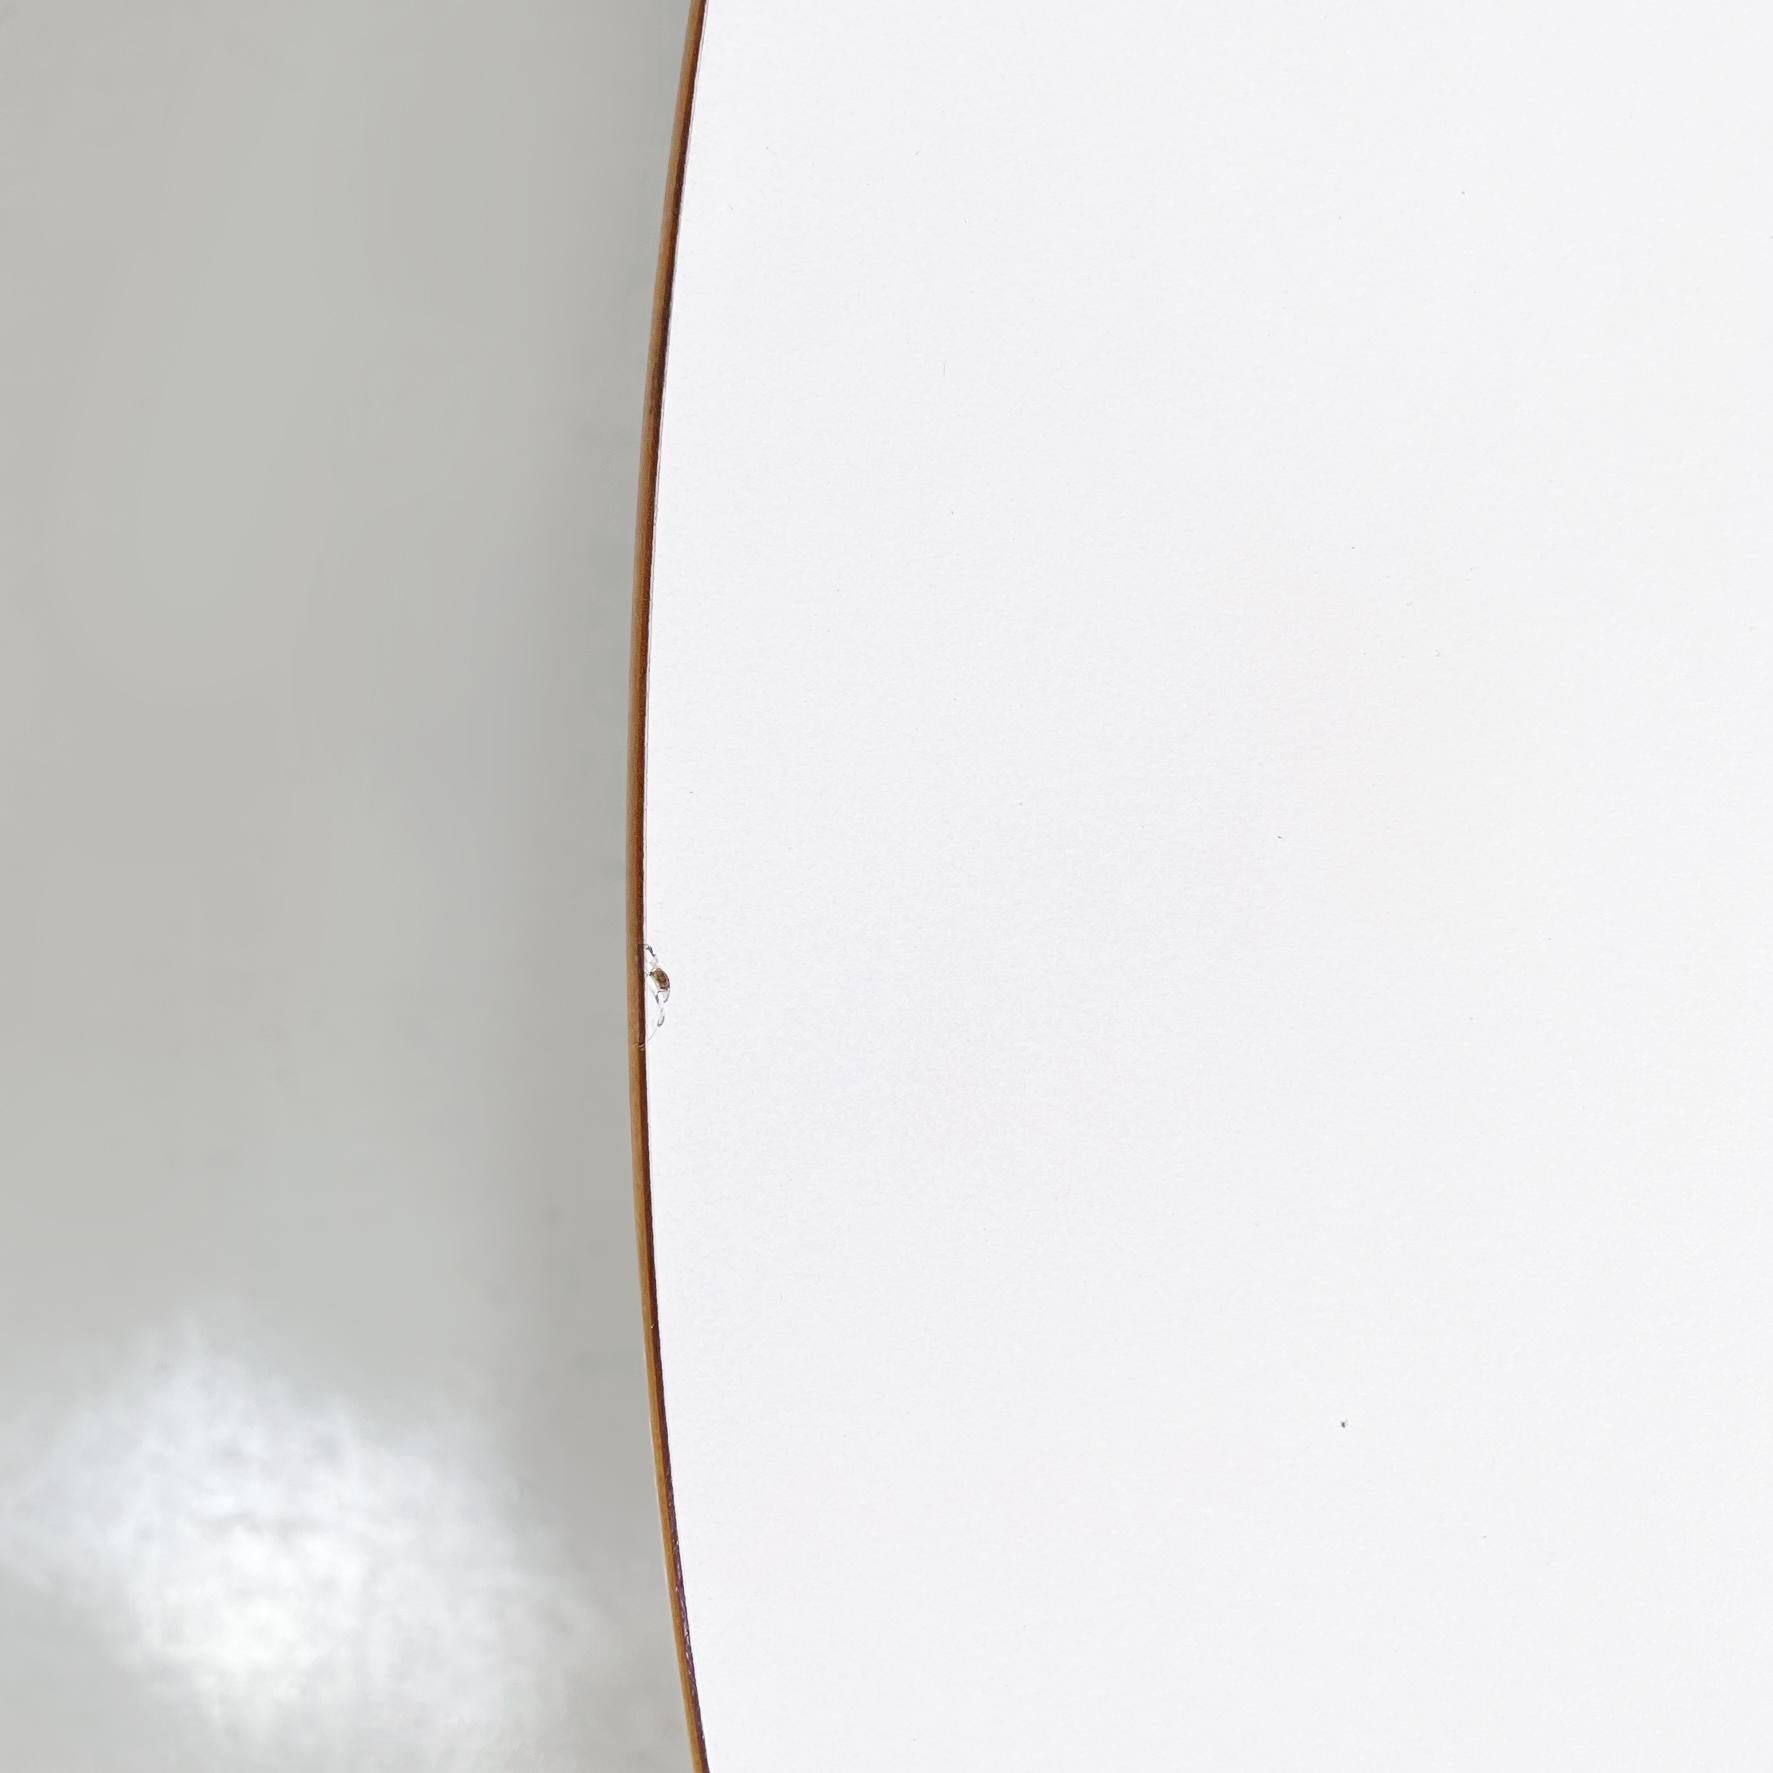 Late 20th Century Italian Modern Round Coffe Table in White Wood and Metal, 1980s For Sale